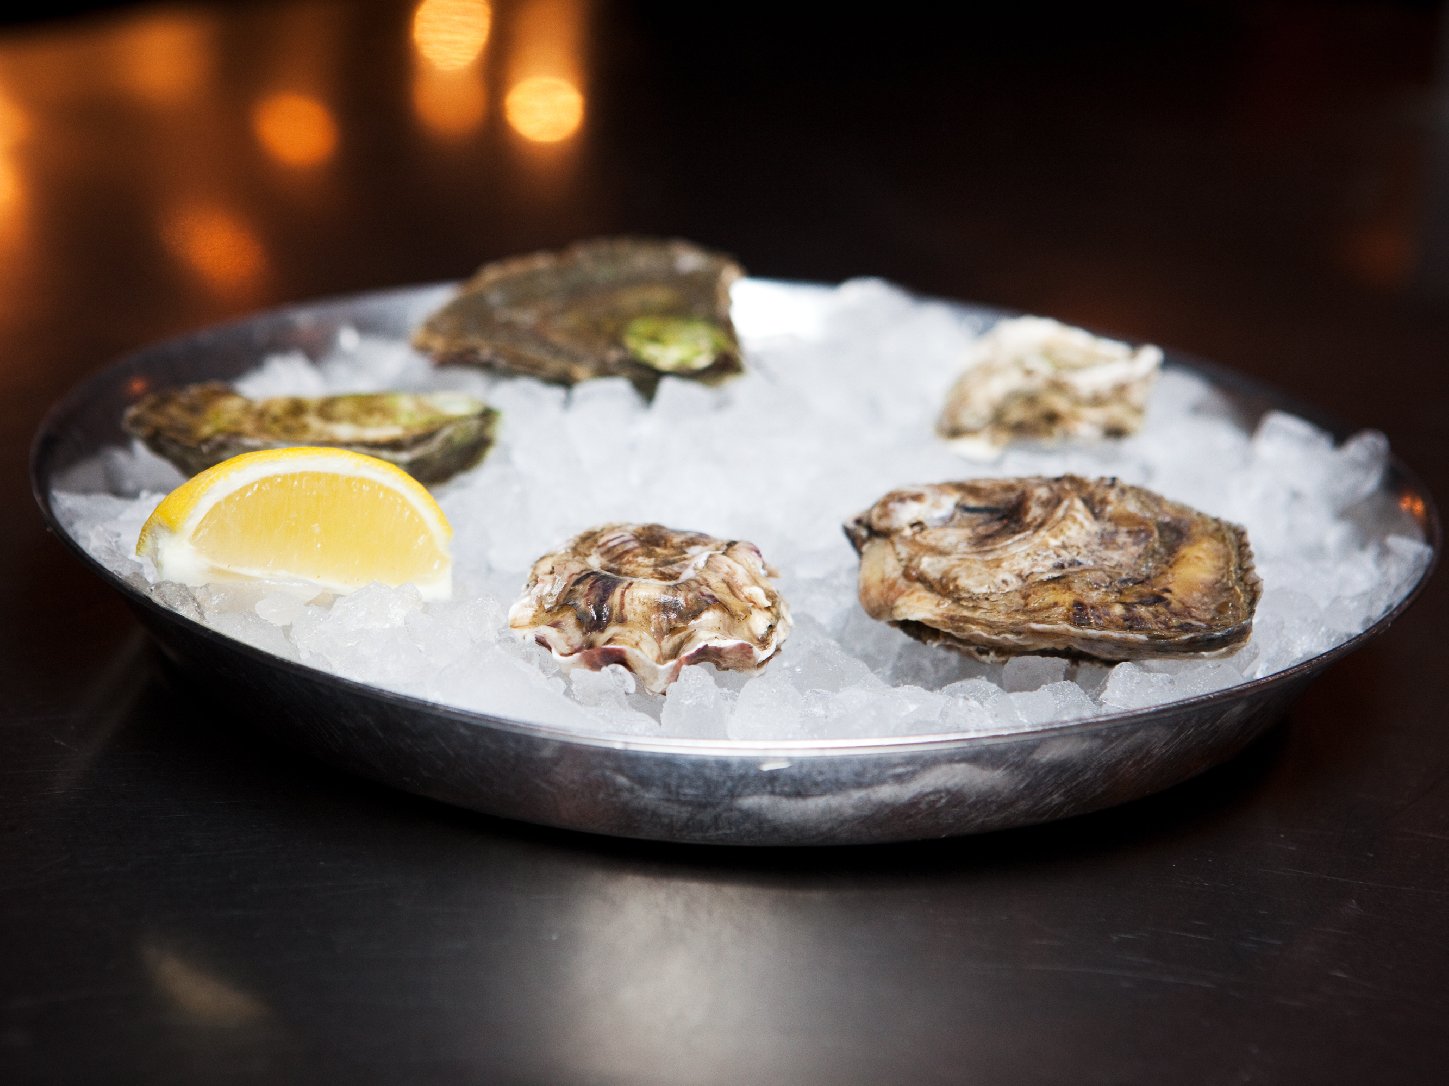 The stories linking oysters and other shellfish to lust go back to at least the ancient Greeks. (Maggie Starbard/NPR)